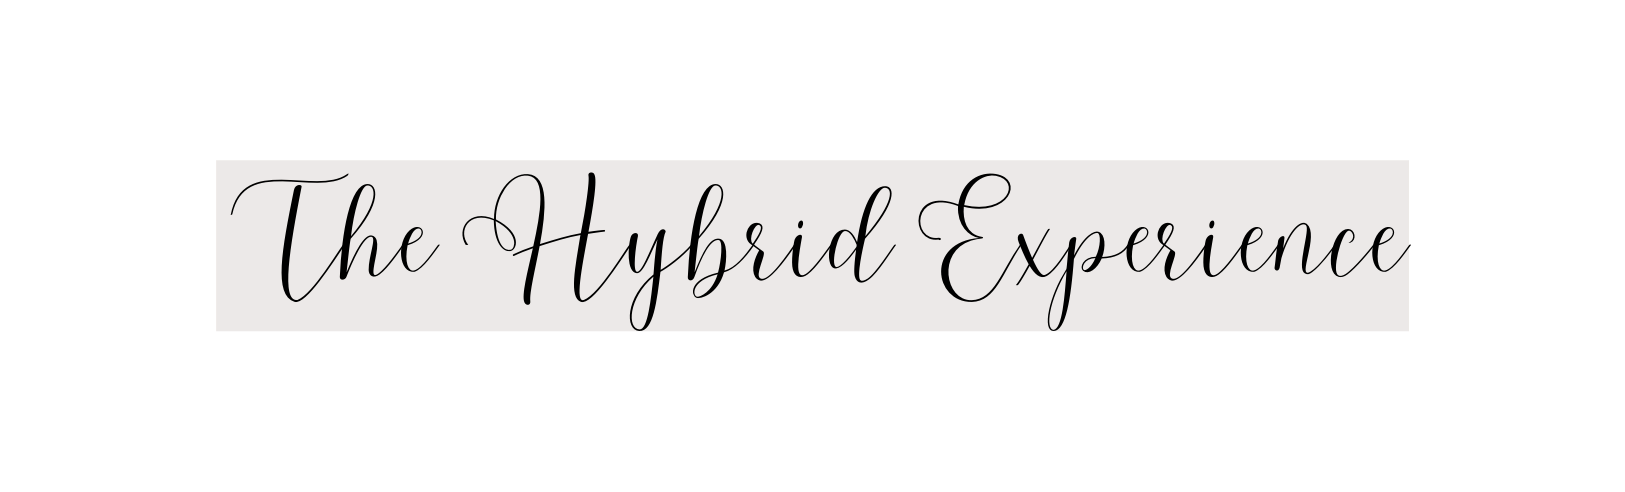 The Hybrid Experience